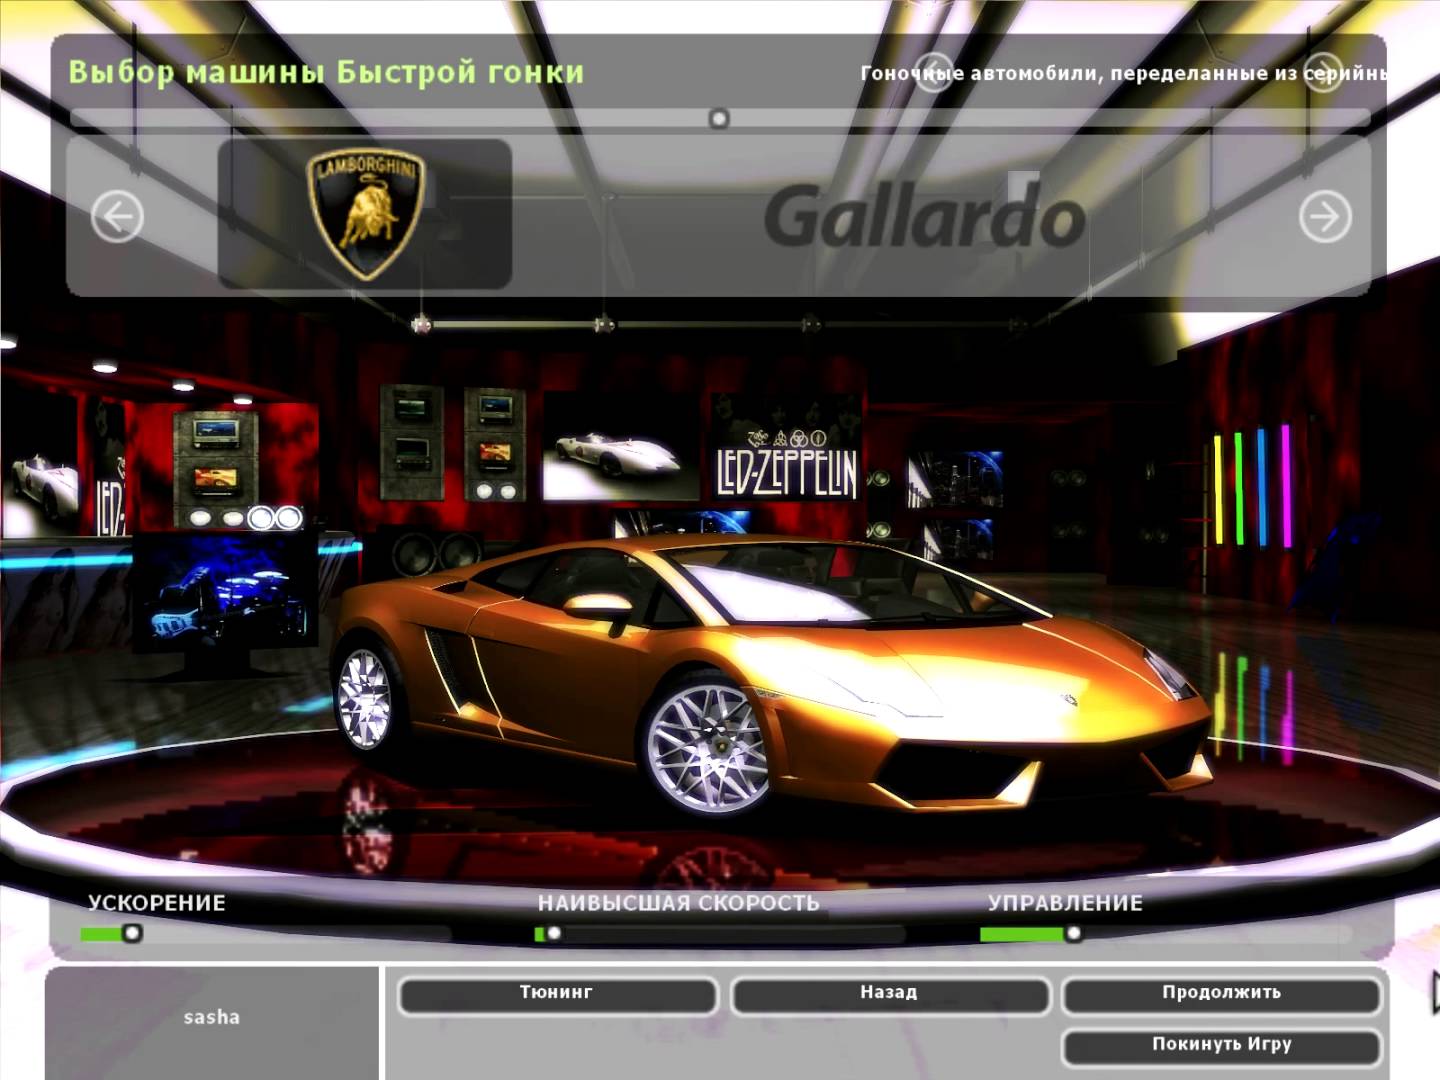 need for speed underground 3 pc download